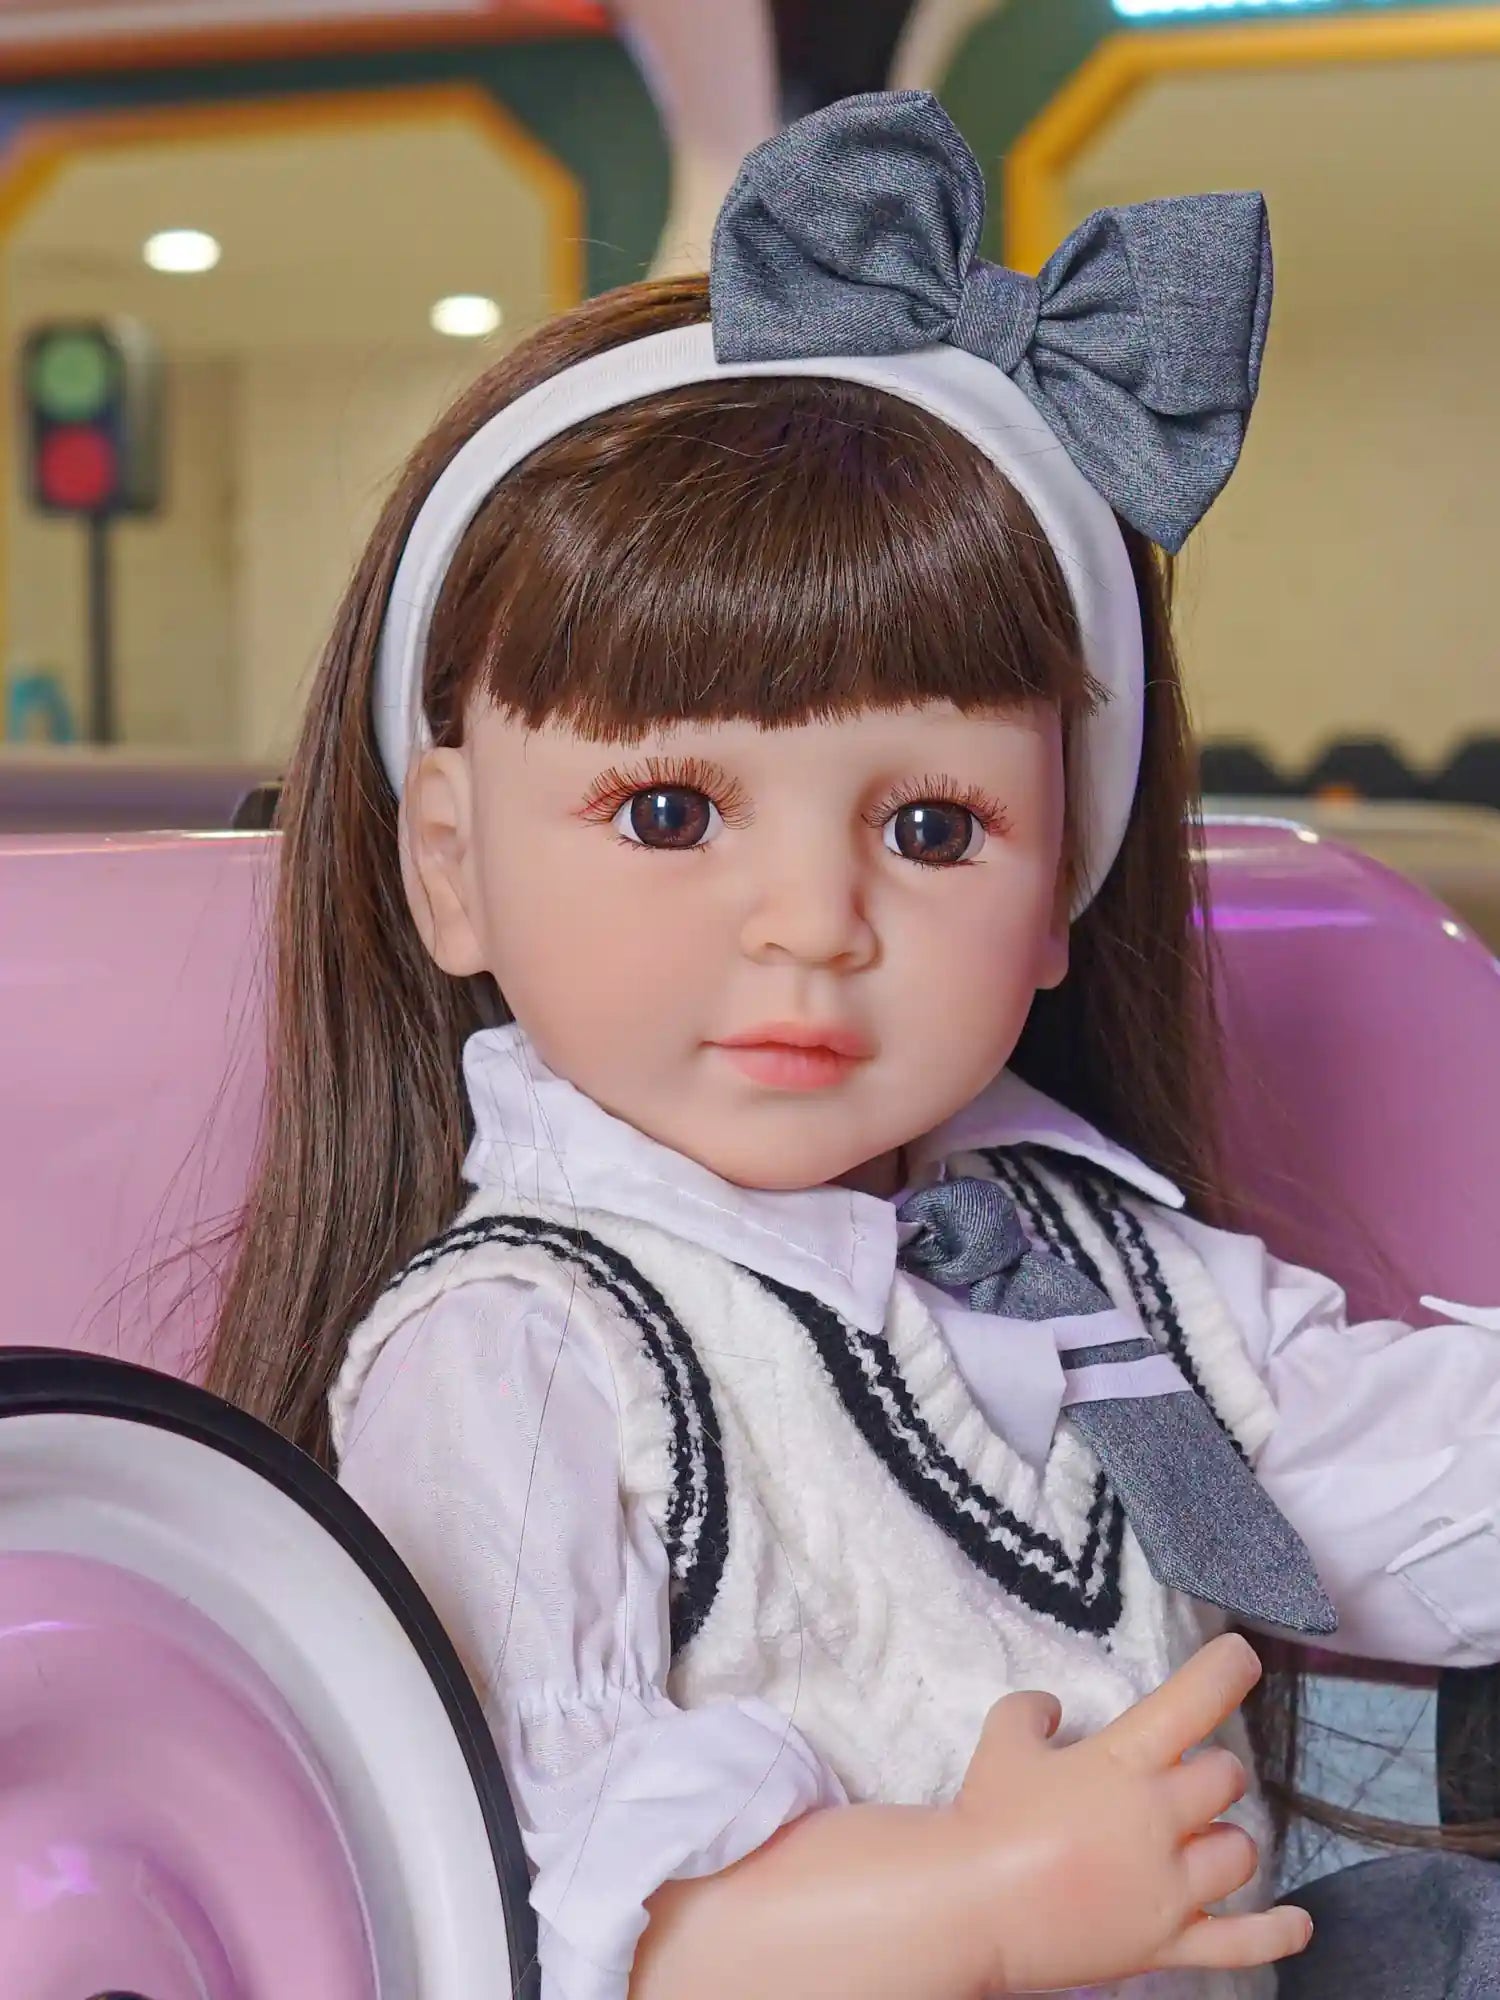 A collectible doll that resembles a little schoolgirl, with brown hair and engaging eyes, dressed in a white blouse and grey jumper, raising her hand as if to speak.